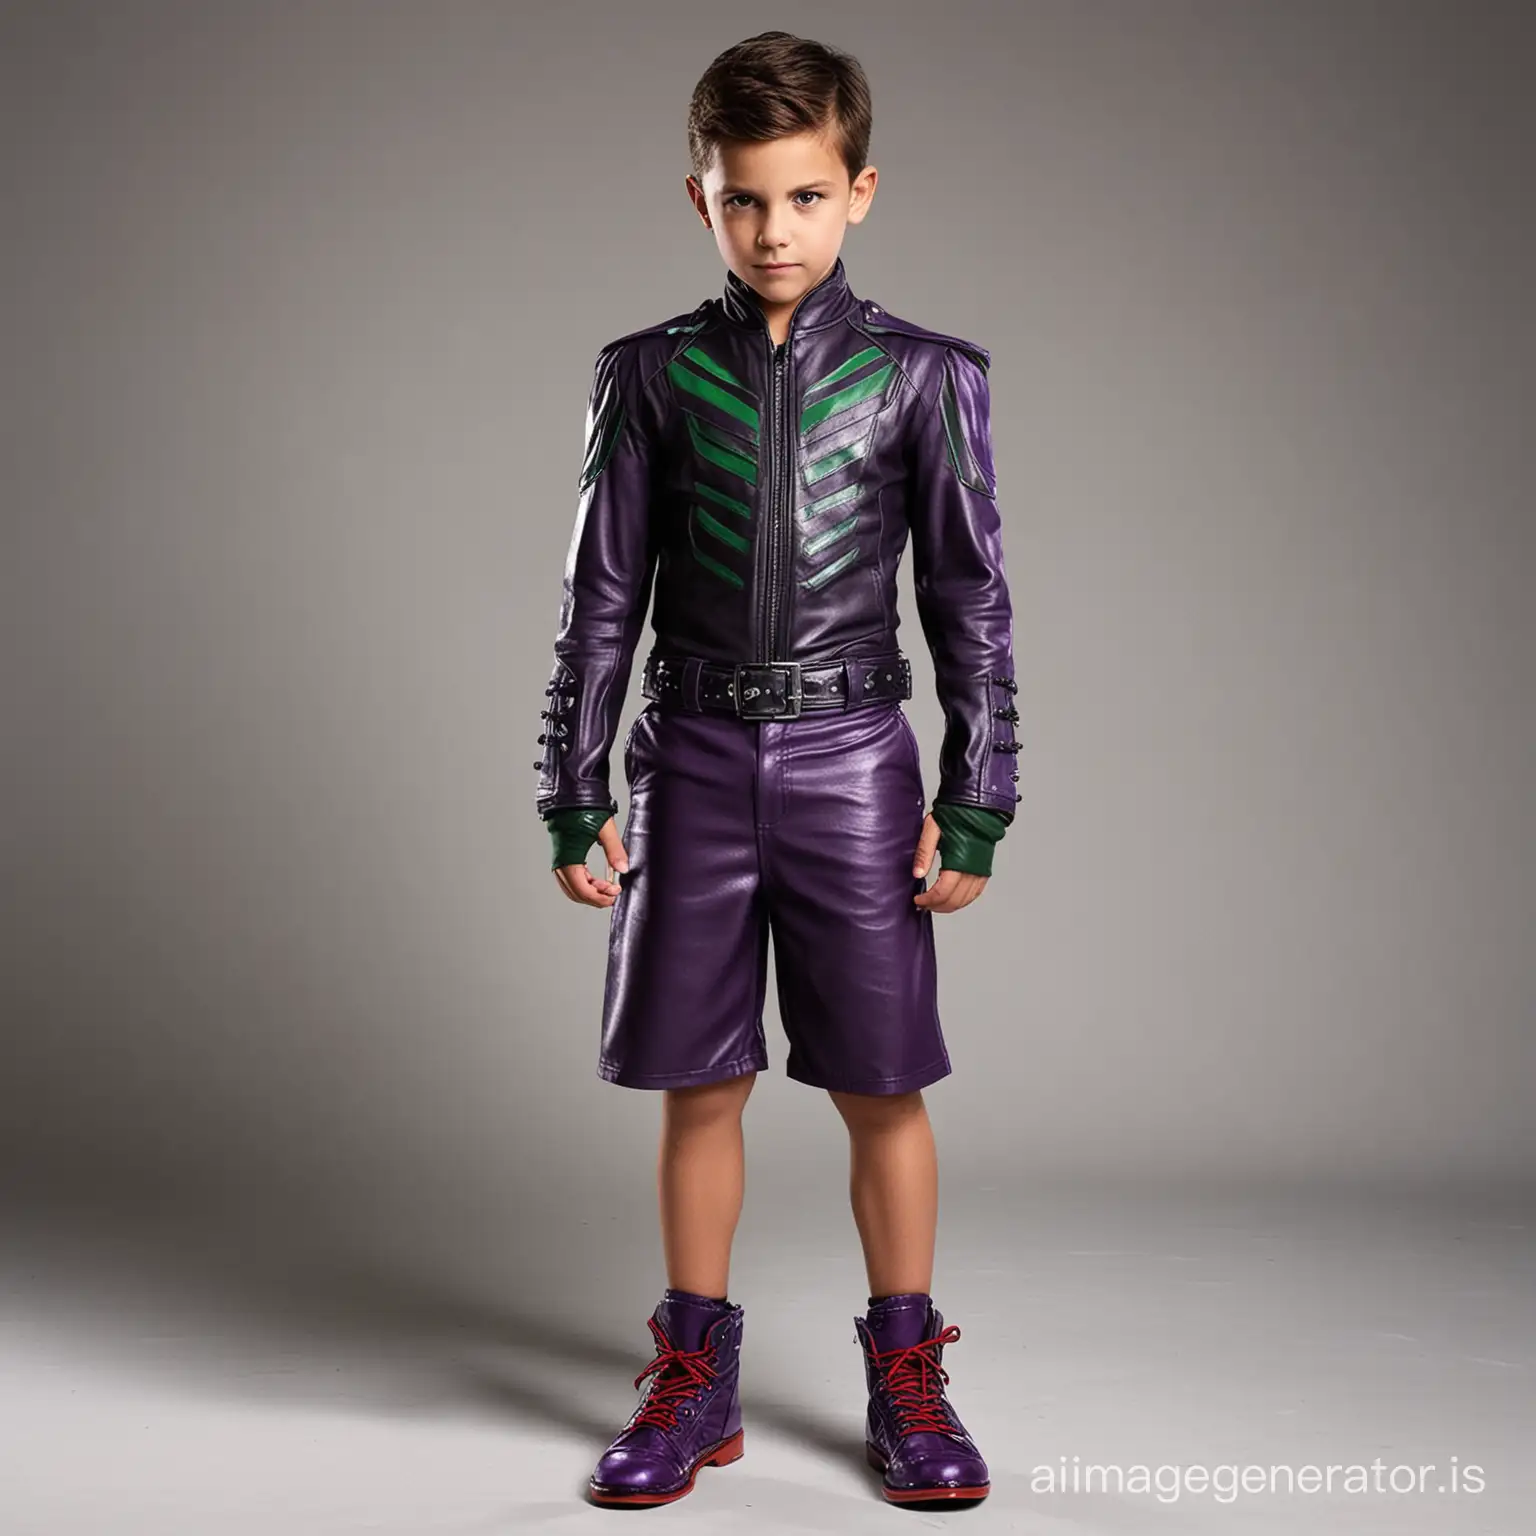 Intimidating-Young-Villain-in-Comfortable-Leather-Outfit-with-Purple-and-Bold-Color-Accents